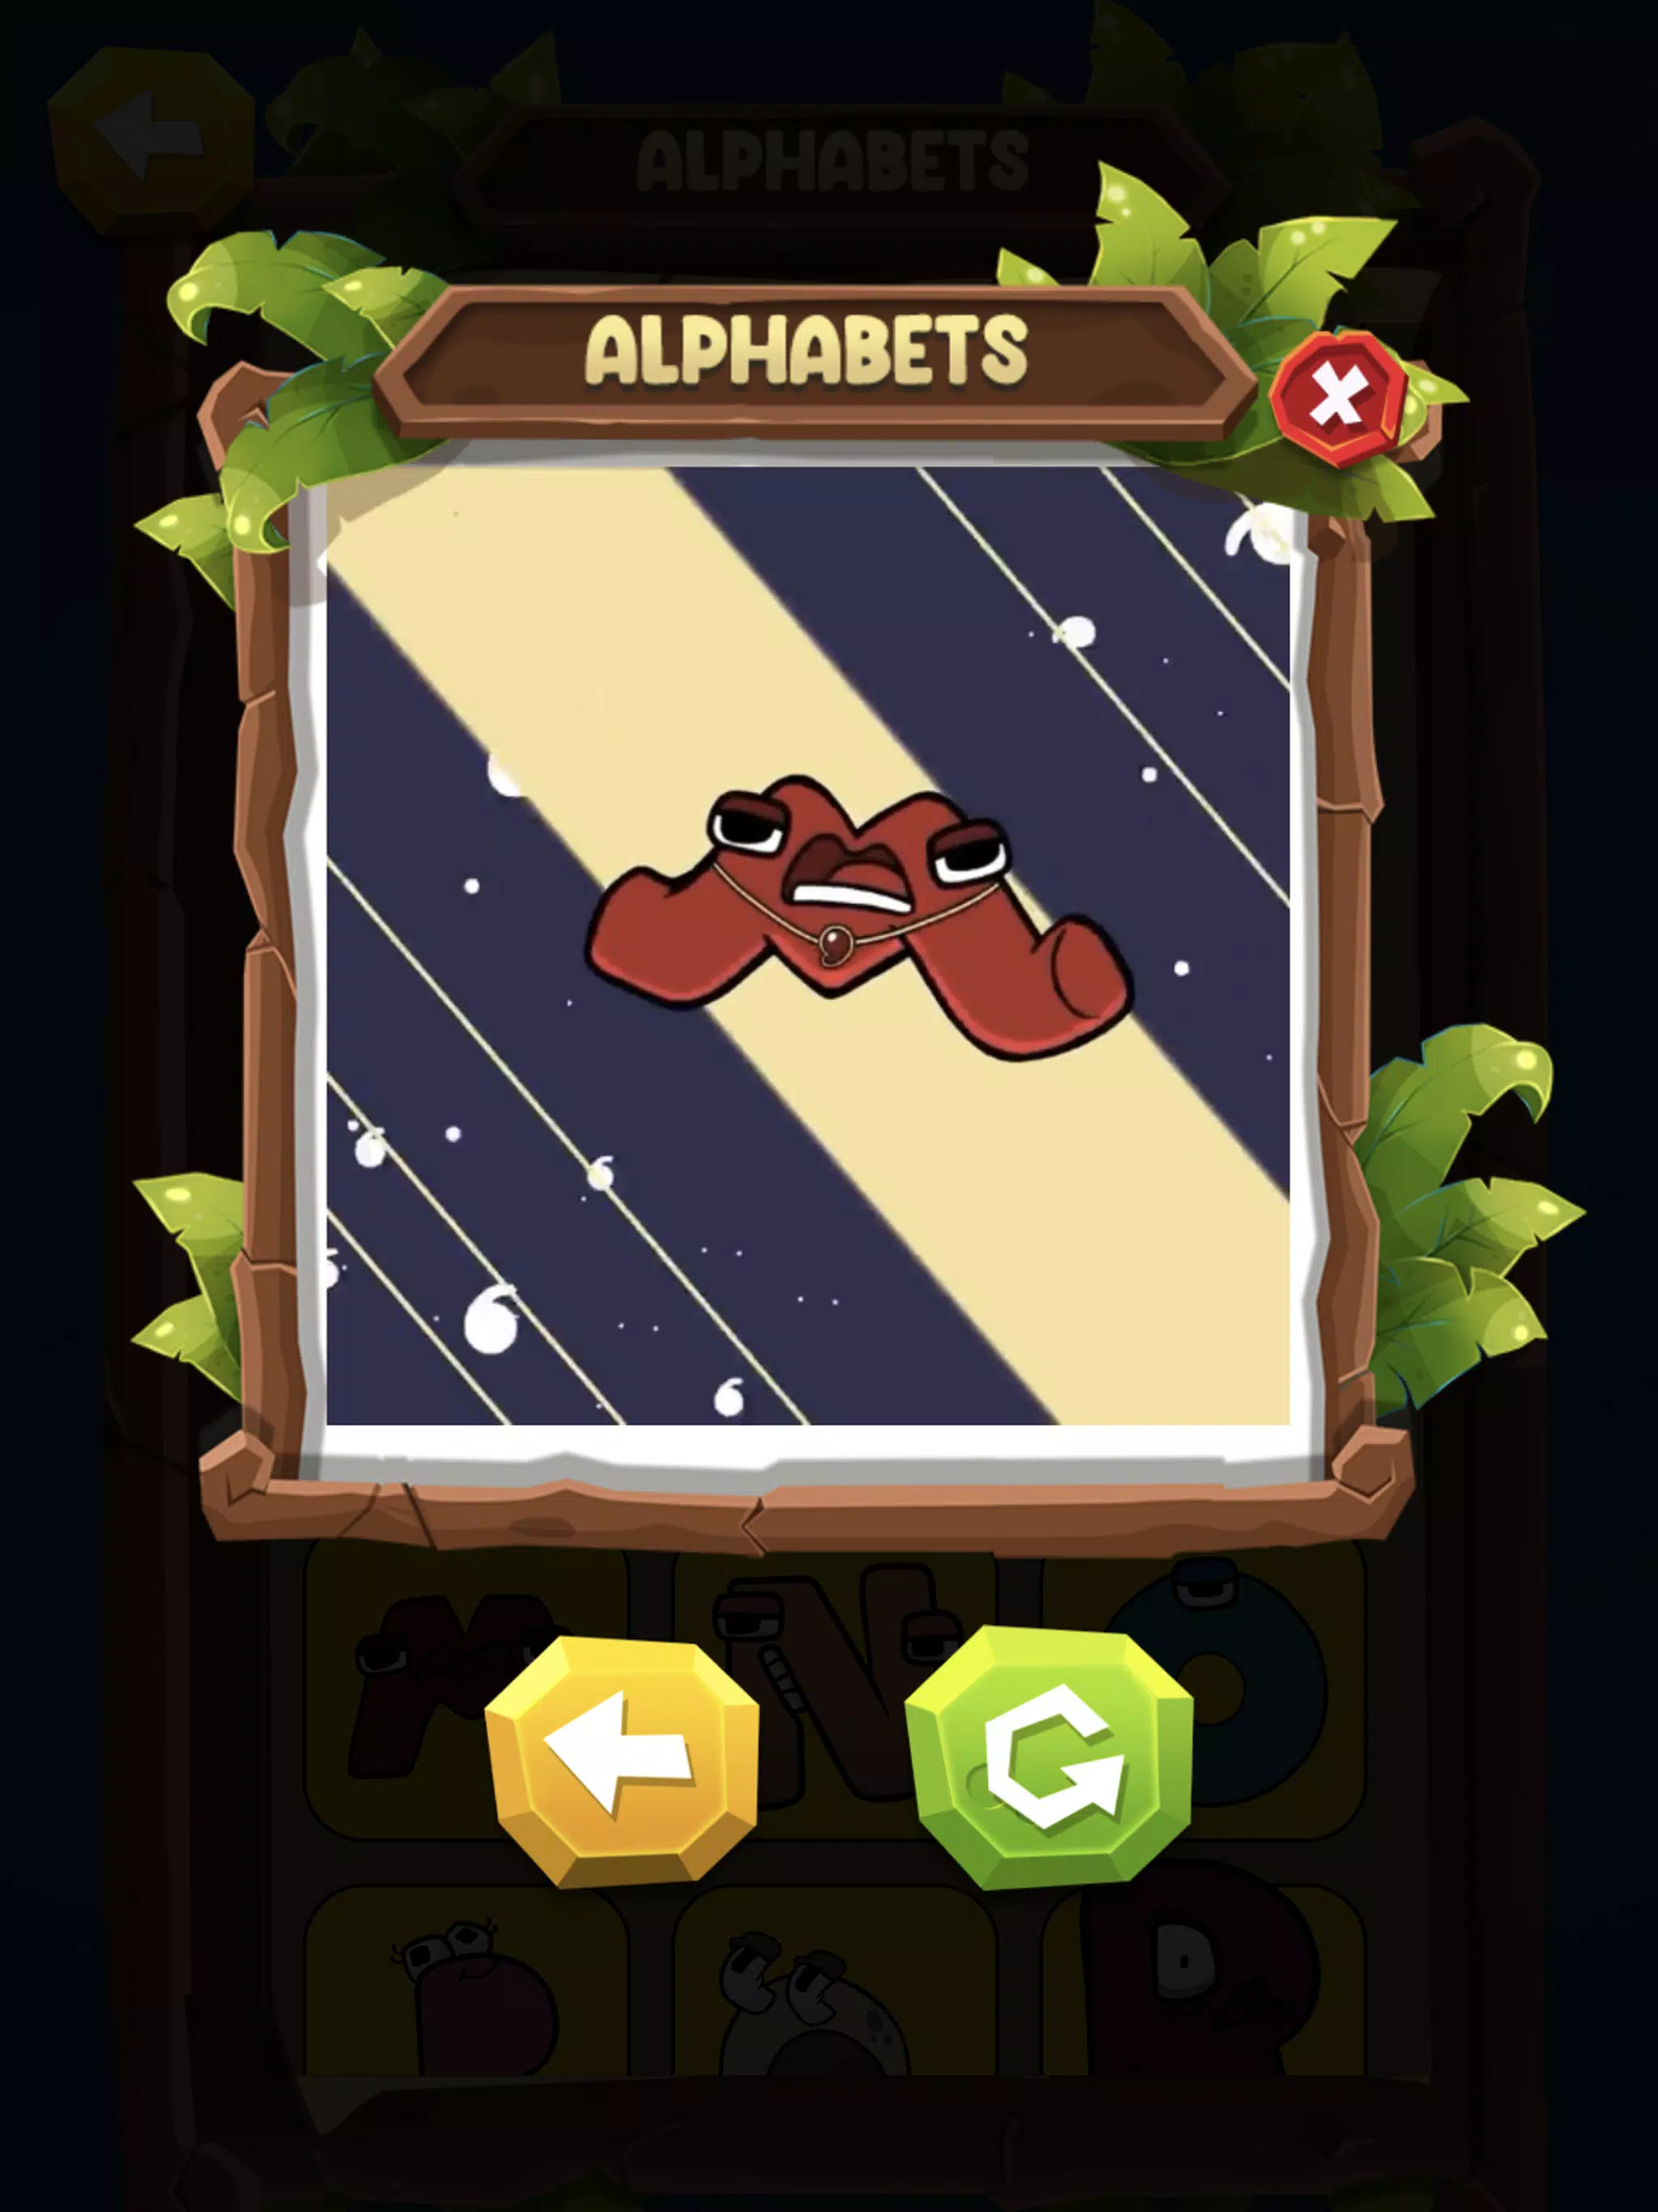 The Alphabet Lore : Game APK (Android Game) - Free Download